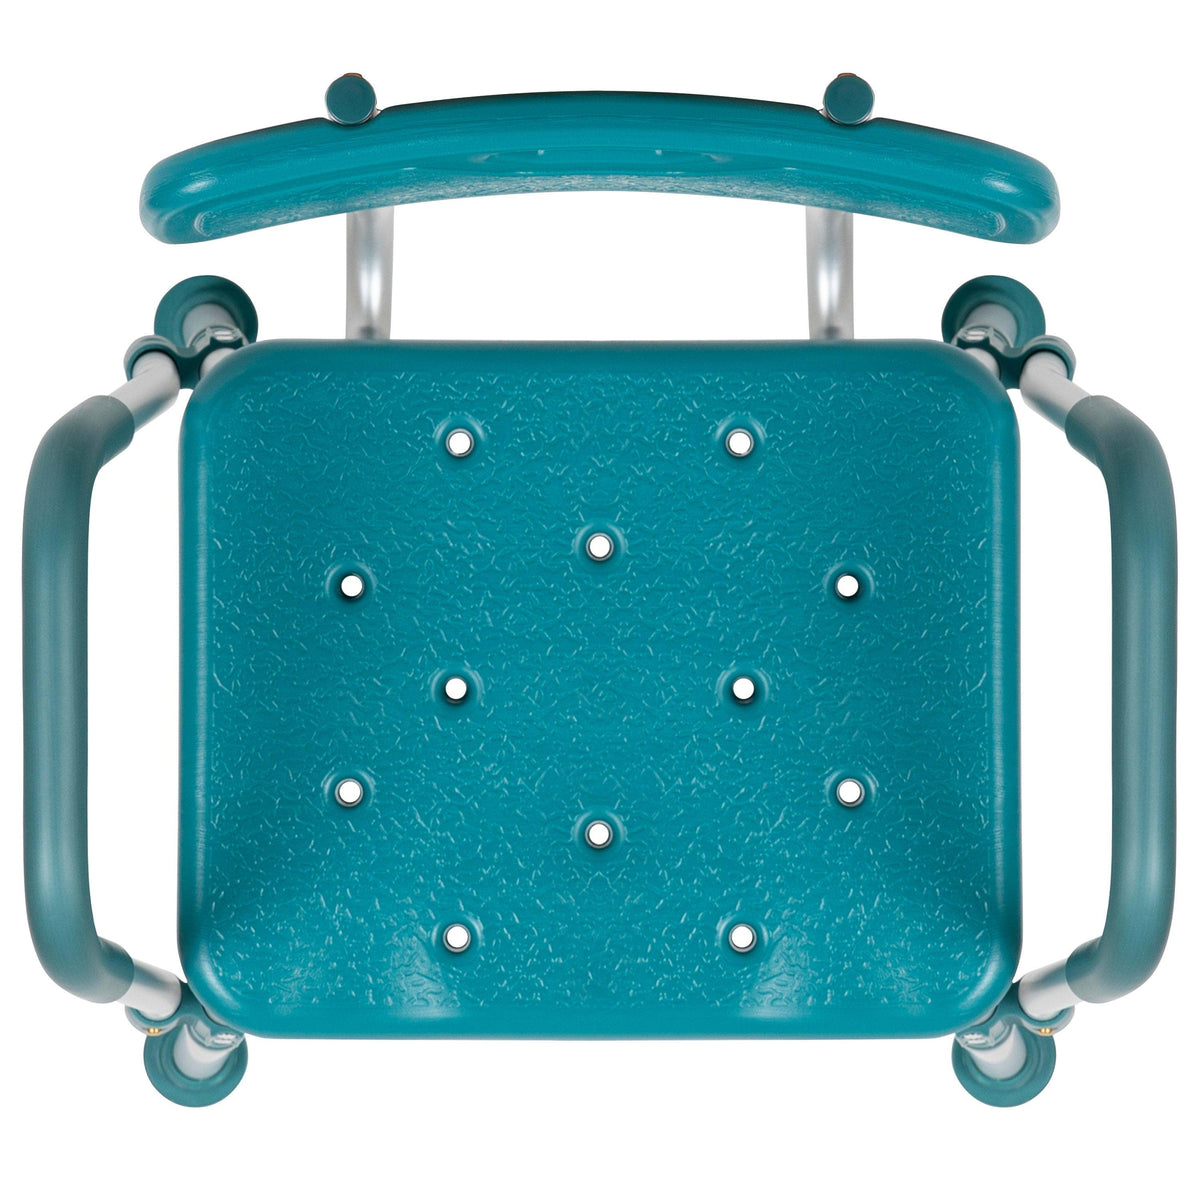 Teal |#| 300 Lb. Capacity Quick Release Back & Arm Teal Shower Chair